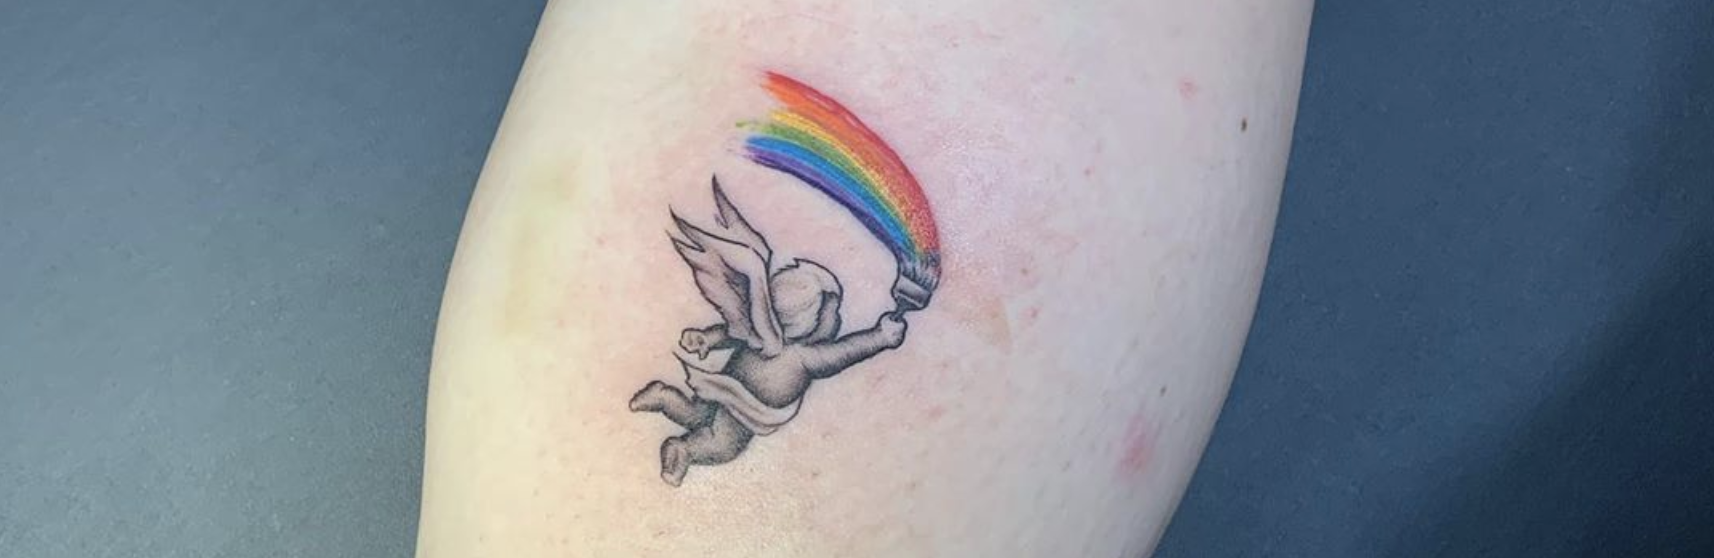 Miscarriage Tattoo - Angel Flying and Painting Rainbow